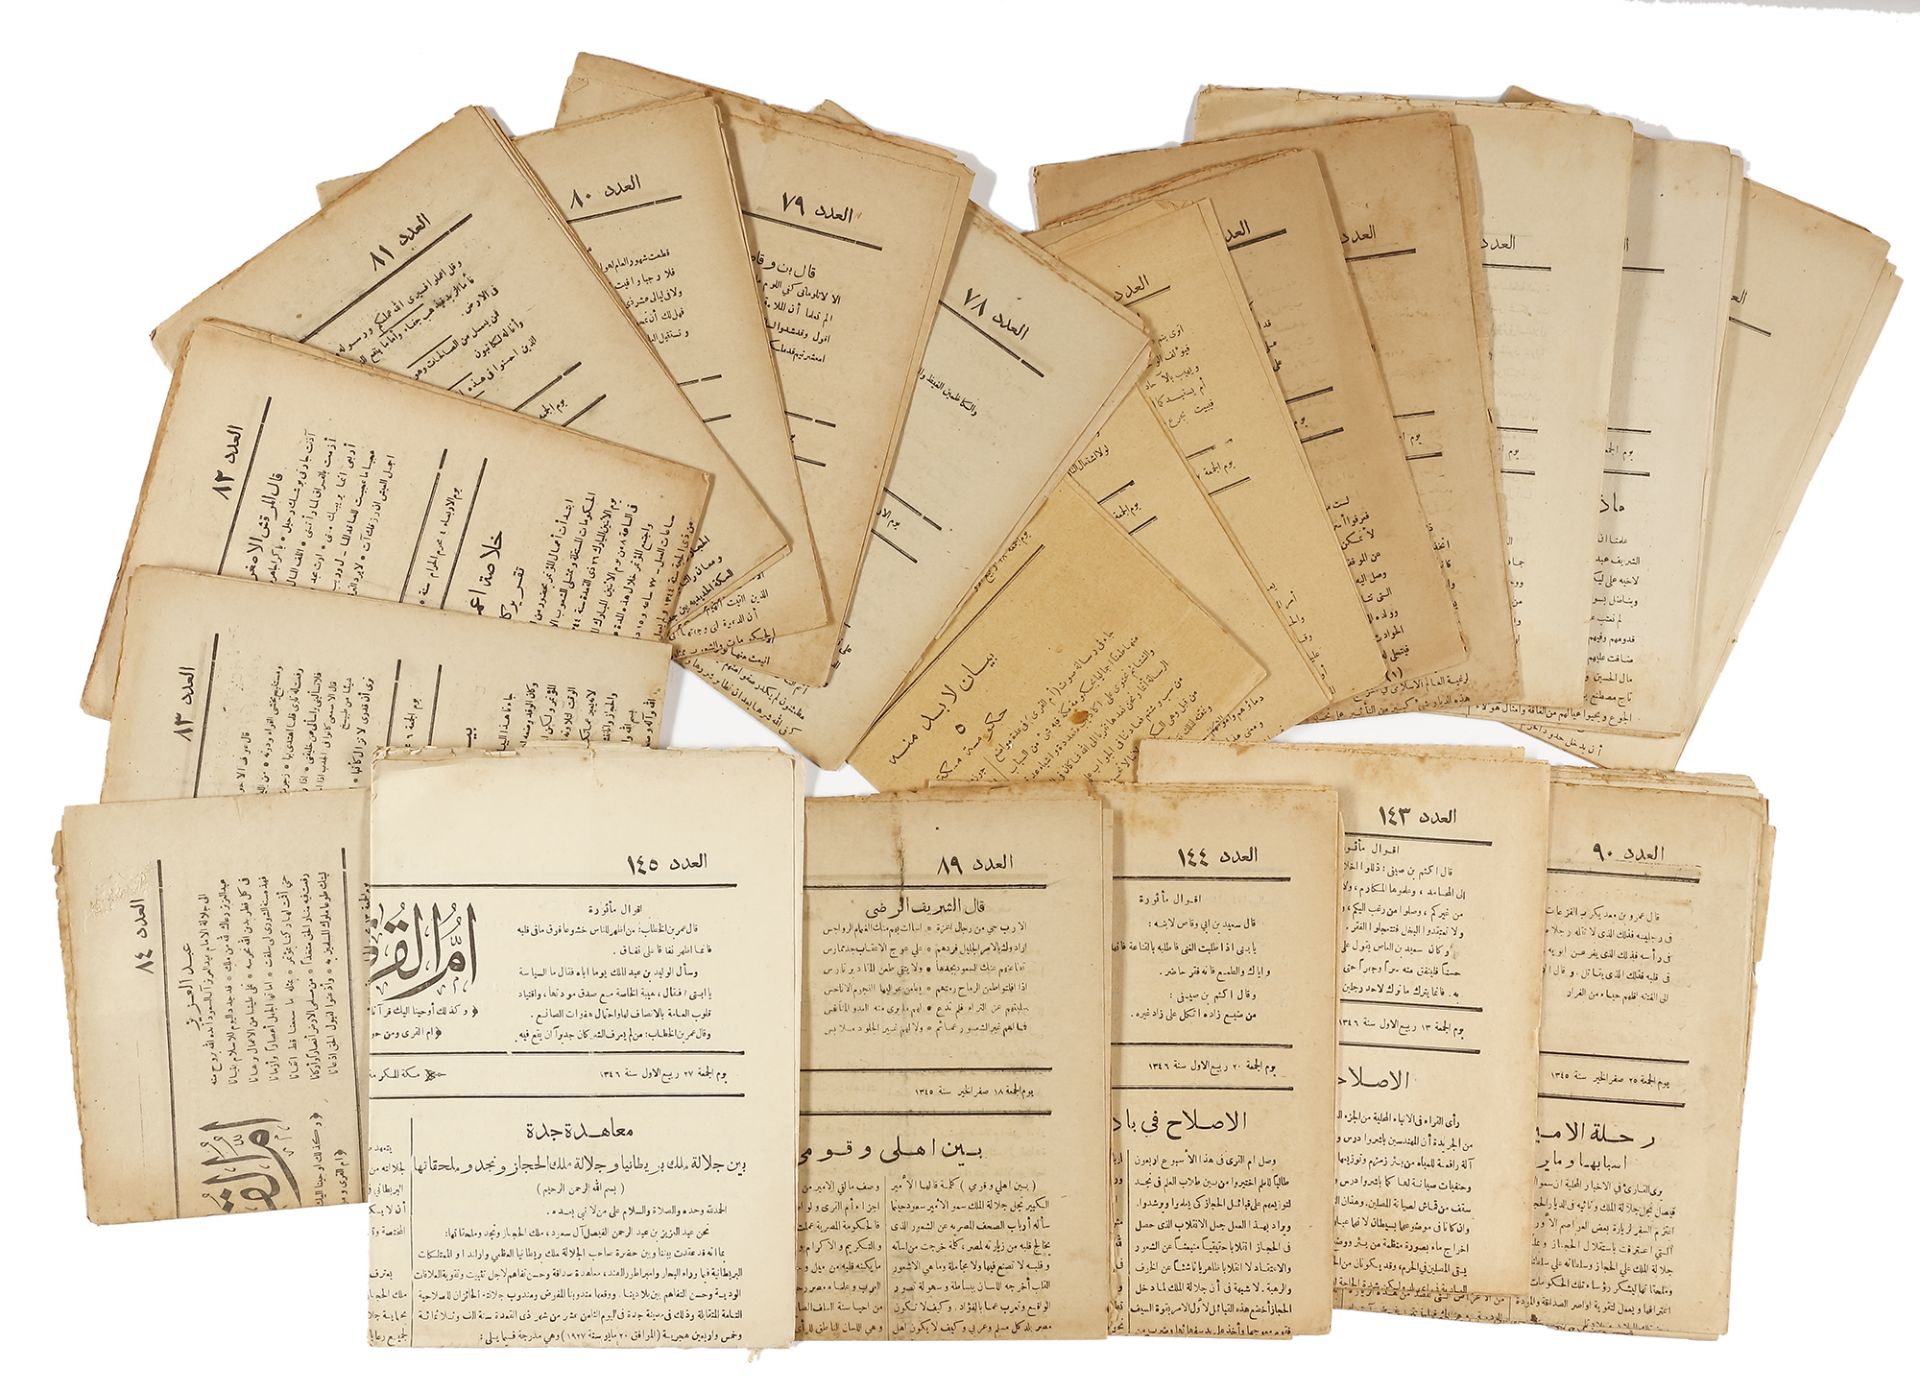 A SELECTION OF THE FIRST NEWSPAPER UMM AL-QURA AS FIRST MODERN-DAY SAUDI ARABIA AND THE OFFICIAL GAZ